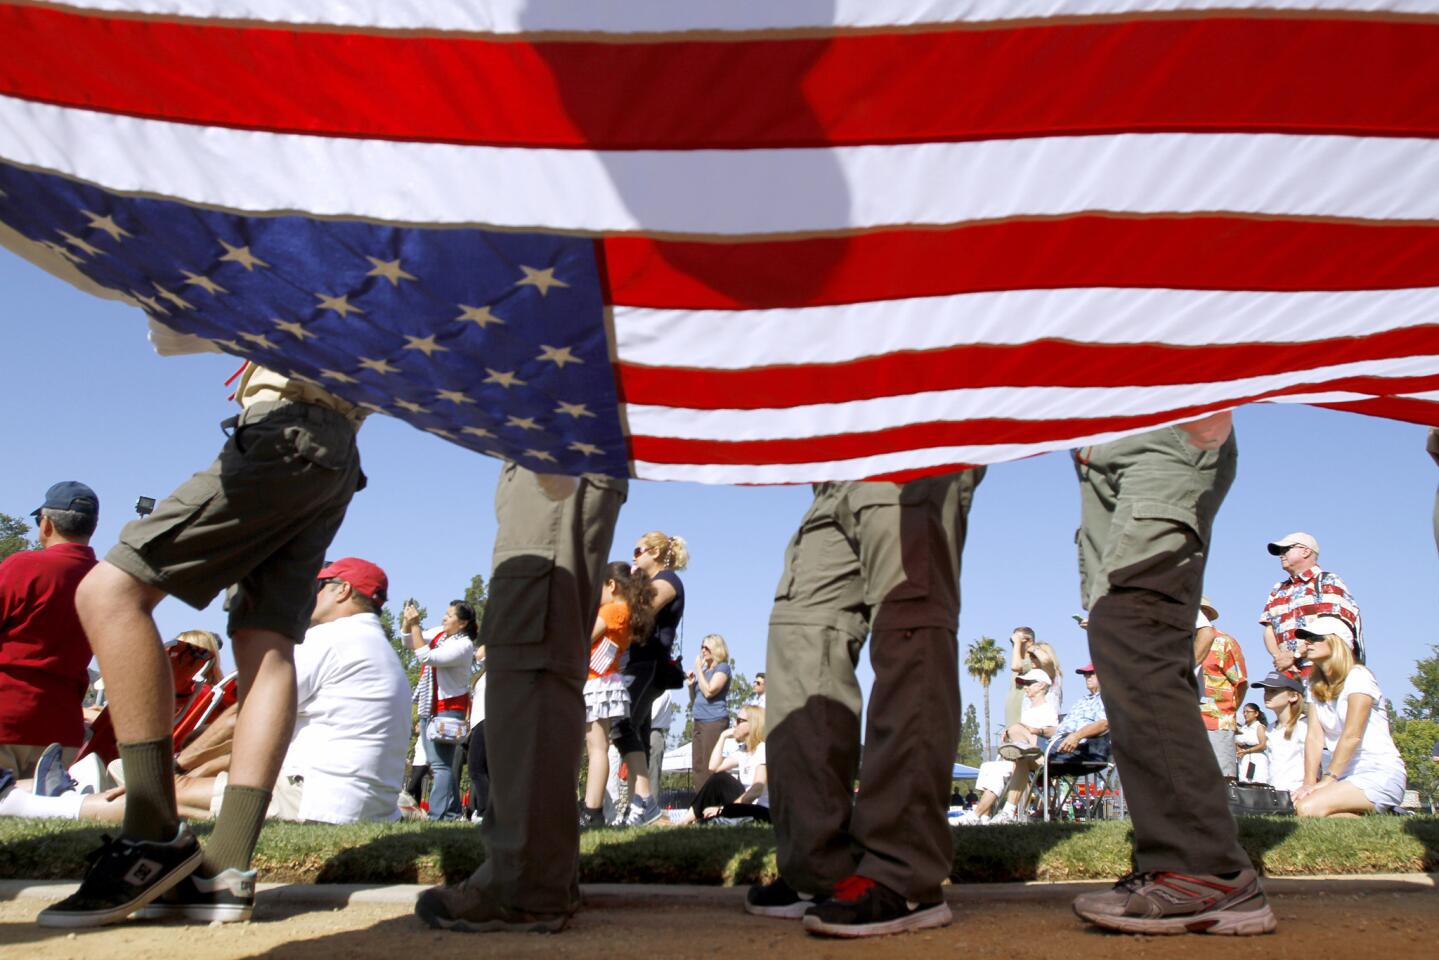 Local boys scouts prepare to raise the U.S. flag during Memorial Day Service at Memorial Park in La Canada Flintridge on Monday, May 26, 2014.